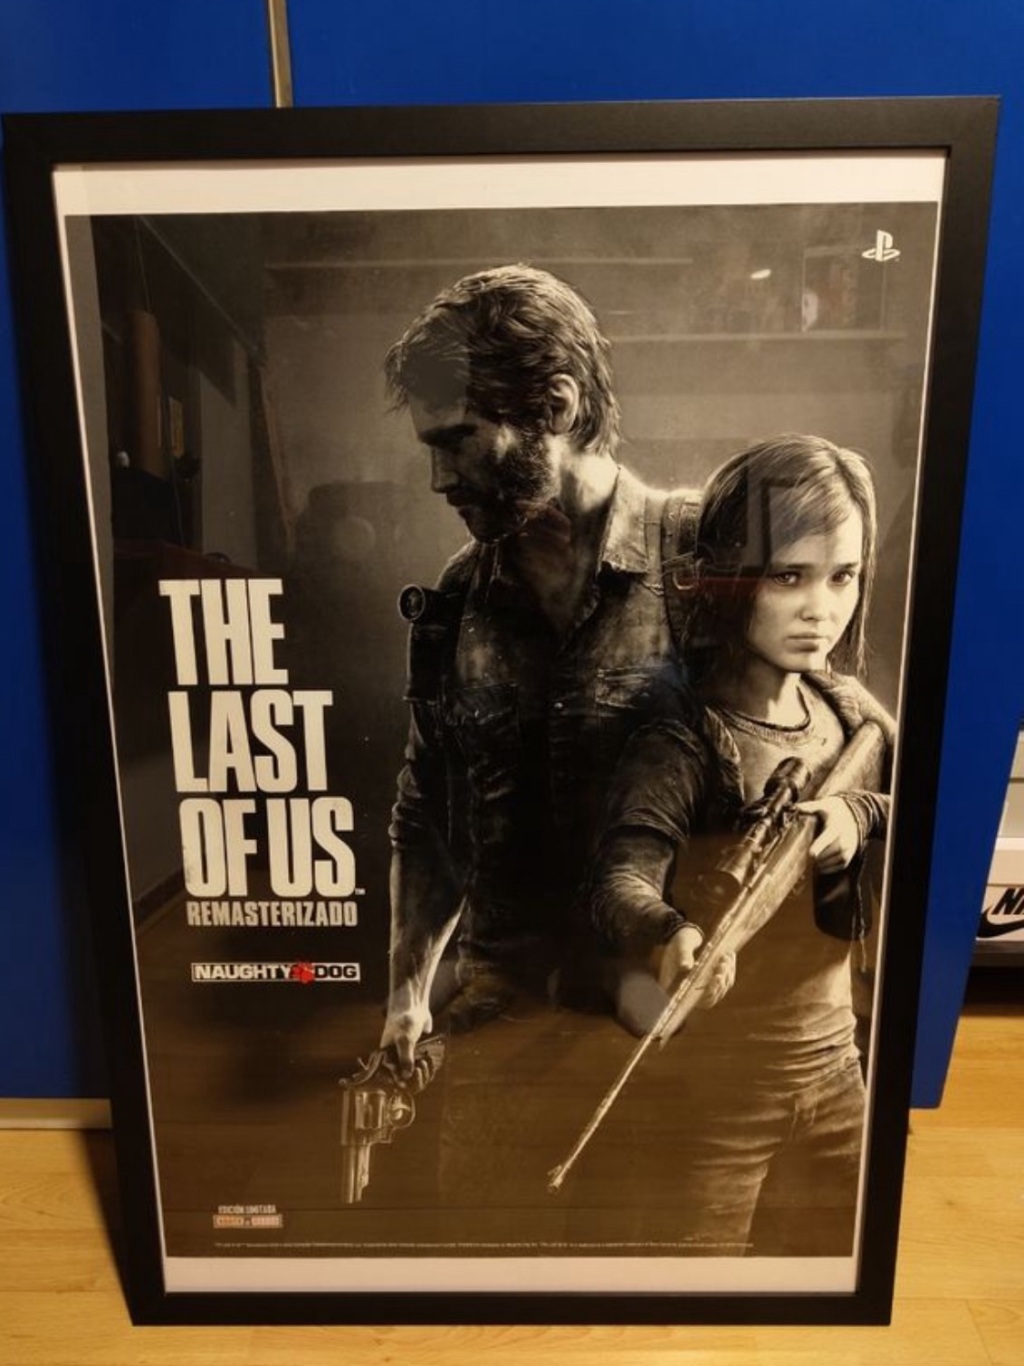 The Last of Us Remastered Limited to 1550 Poster